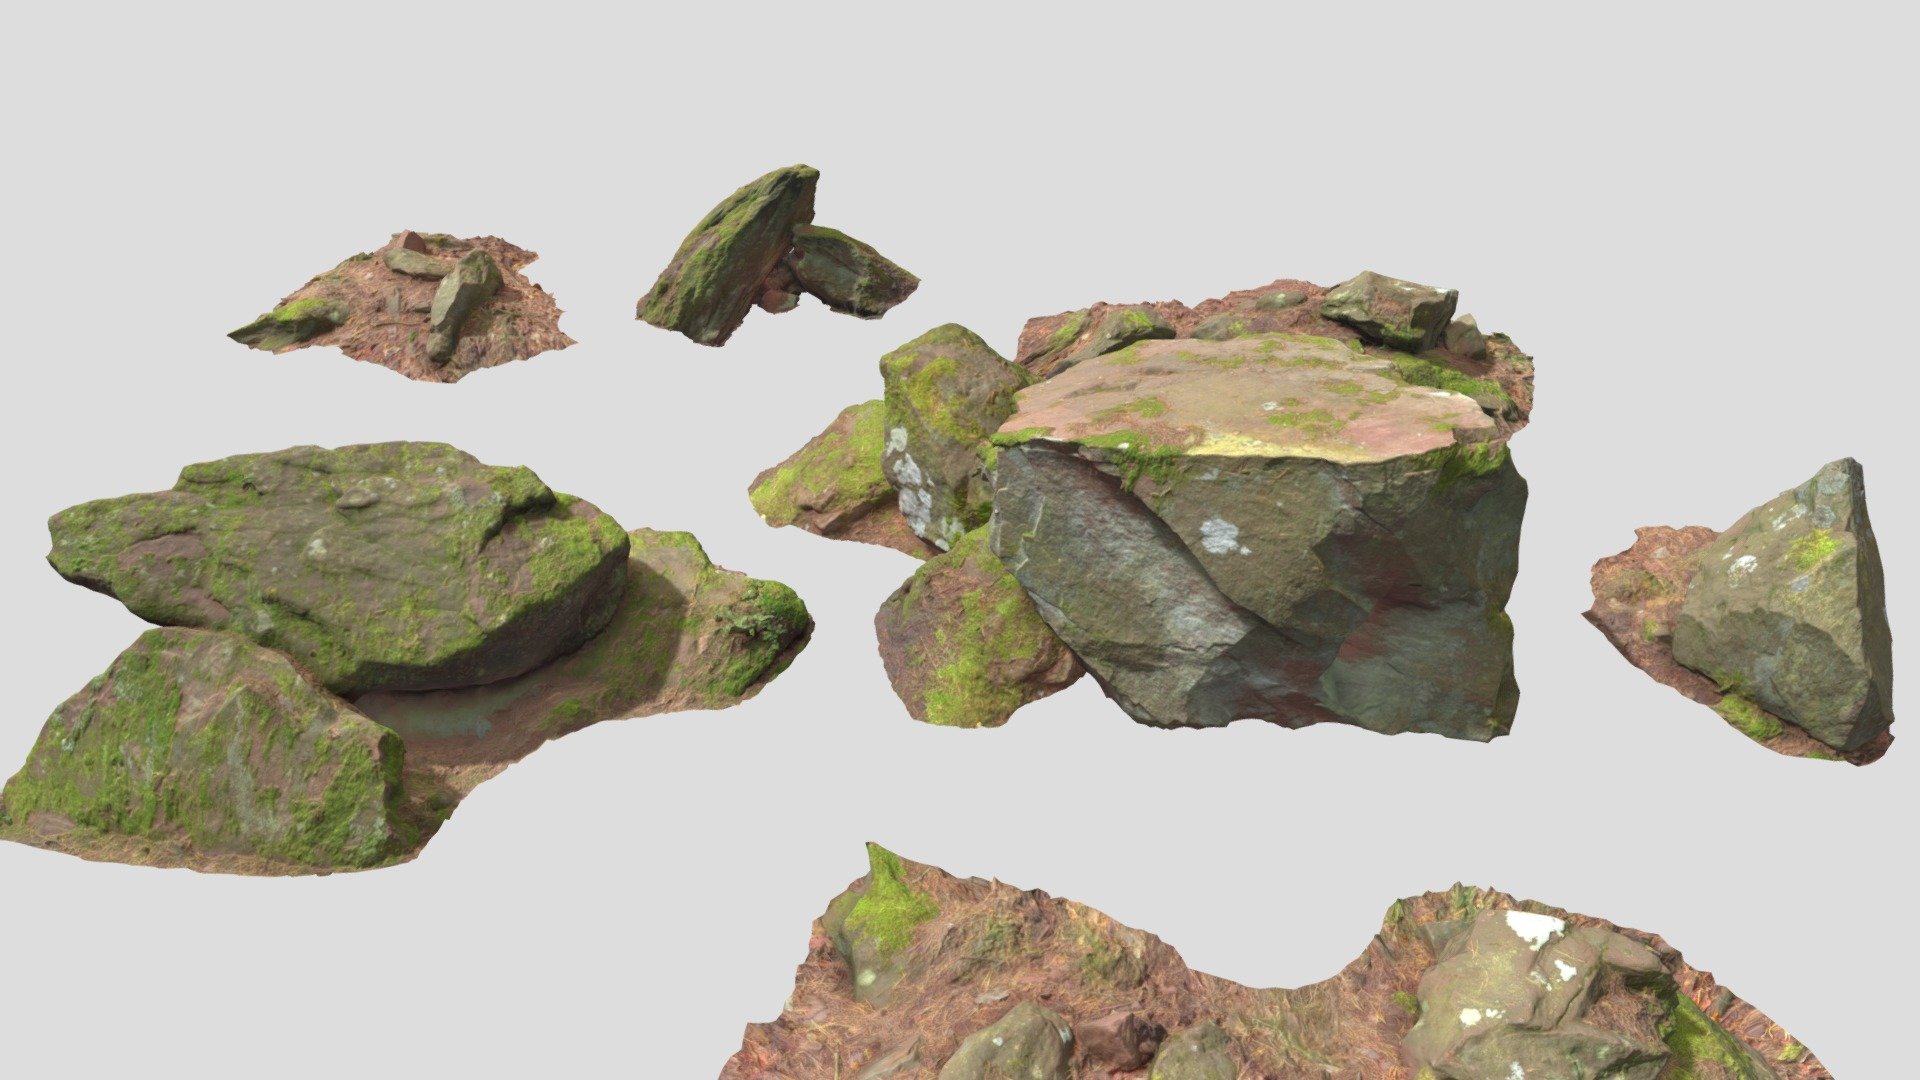 Fully processed 3D scans: no light information, color-matched, etc.

Ready to use for all kind of CGI

Source Contains:
- .obj
- .fbx
- .blend

4K Textures:
- normal map
- albedo
- roughness

Please let me know if something isn't working as it should.

Realistic Rocks Stone Forest Pack Sandstone Scan - Rocks Stone Forest Pack Sandstone Scan - Buy Royalty Free 3D model by Per's Scan Collection (@perz_scans) 3d model